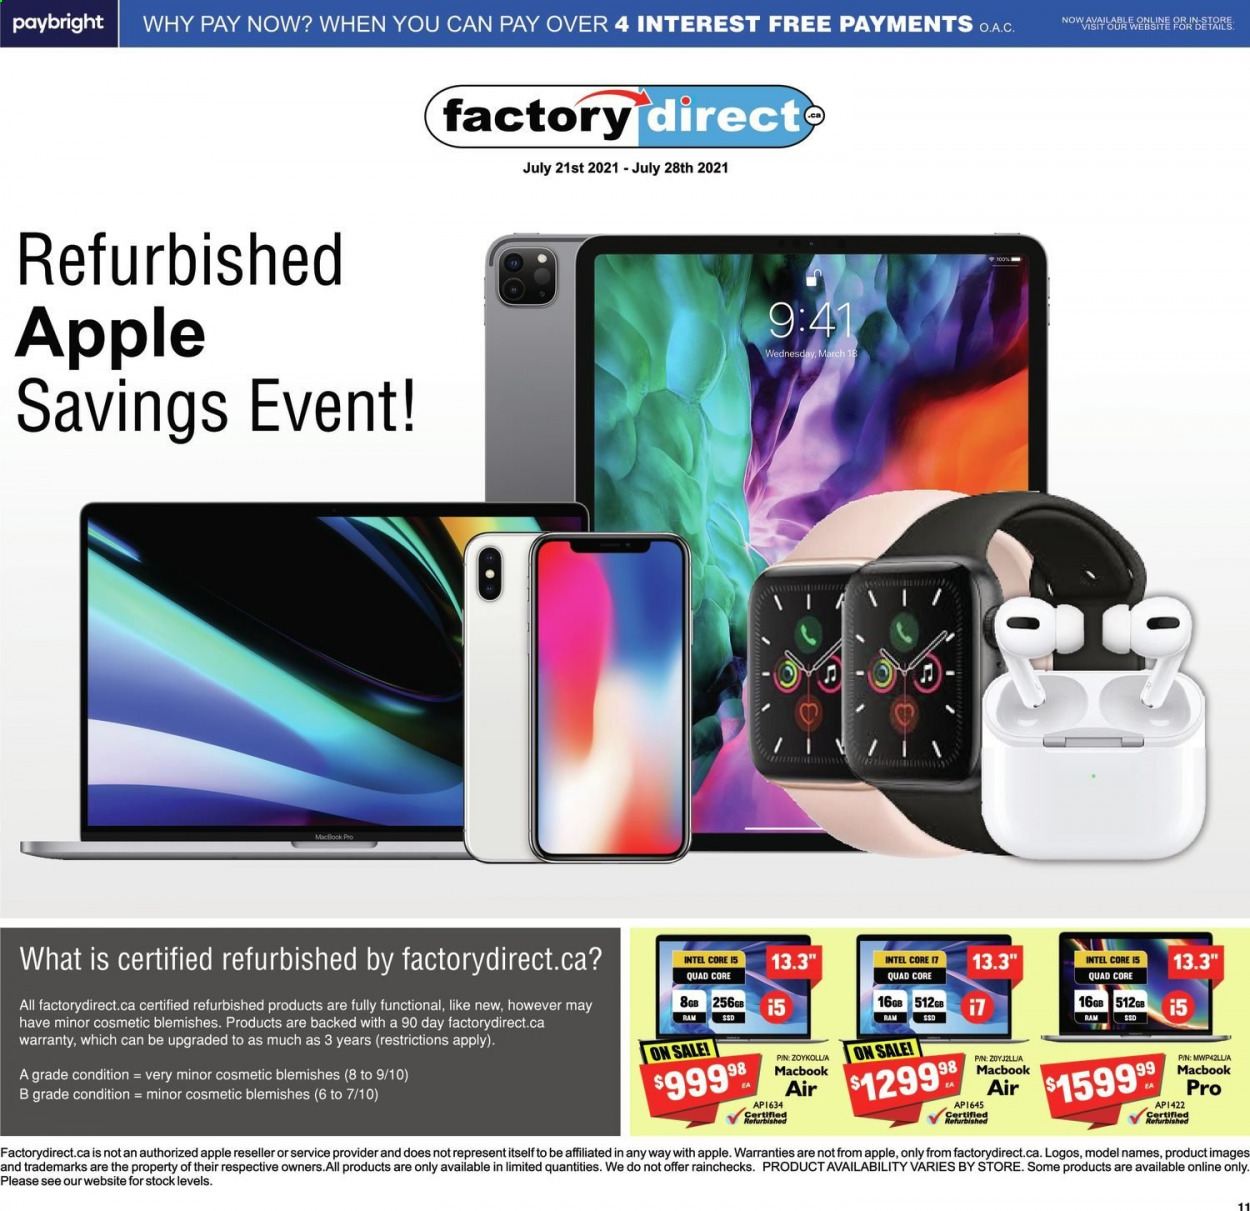 Factory Direct flyer  - July 21, 2021 - July 28, 2021.